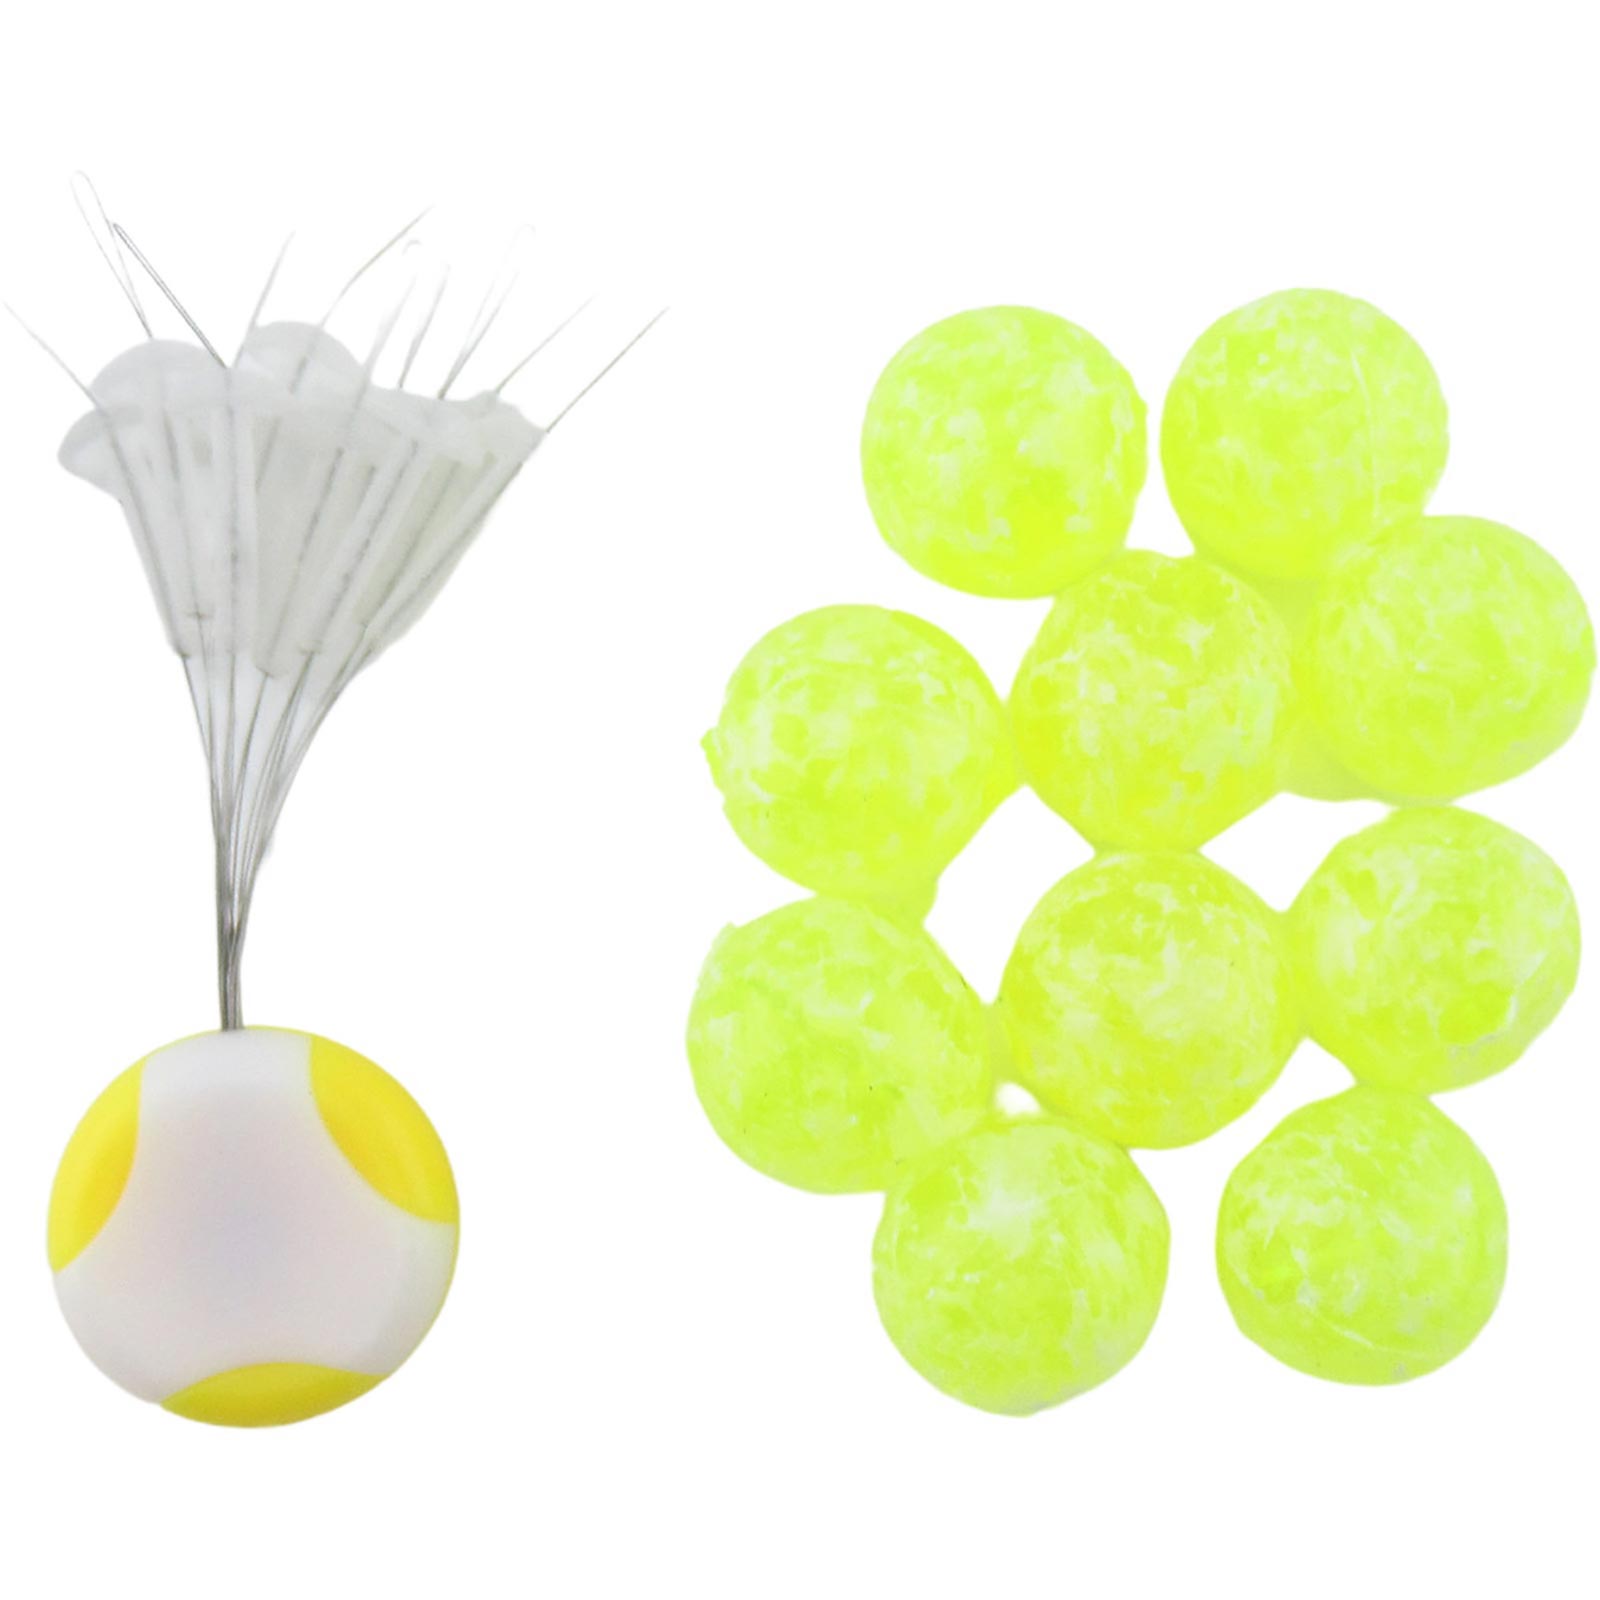 BNR Tackle 20mm Soft Beads, Small